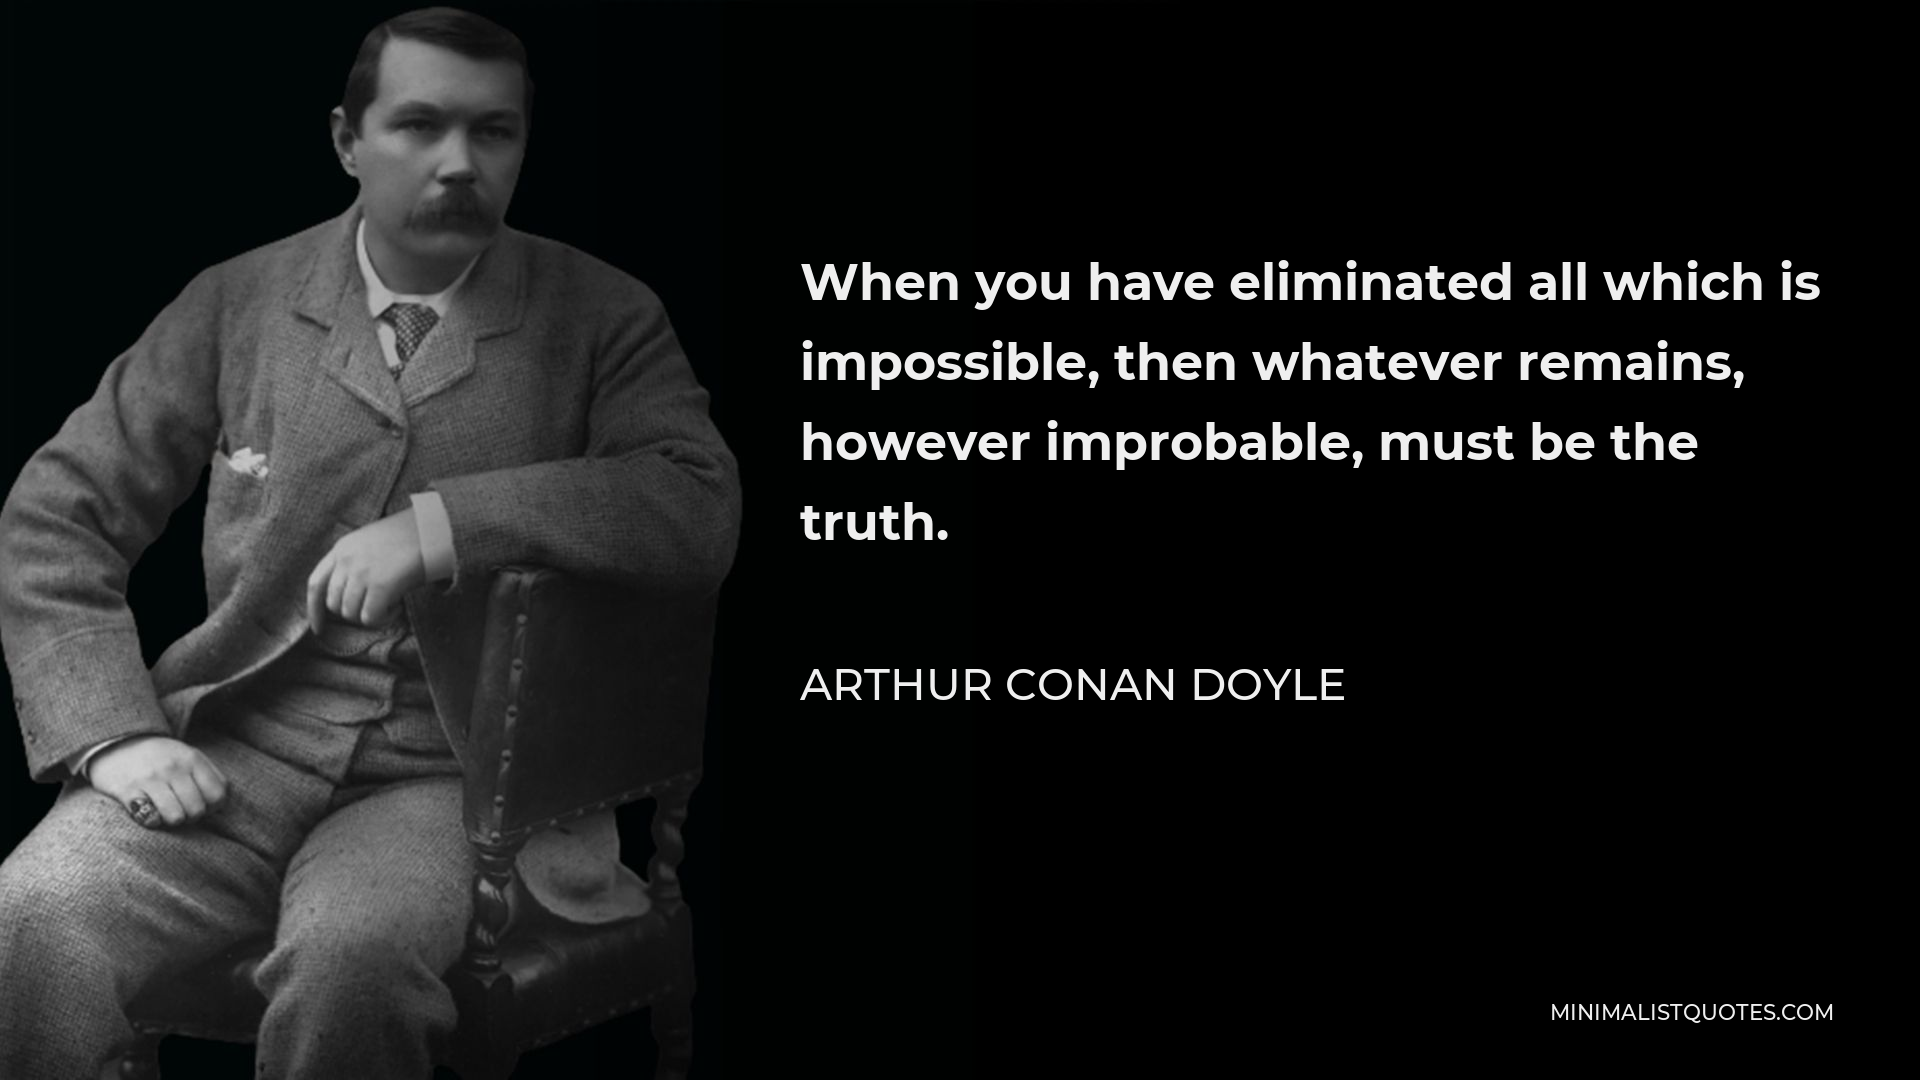 Arthur Conan Doyle Quote - When you have eliminated all which is impossible, then whatever remains, however improbable, must be the truth.